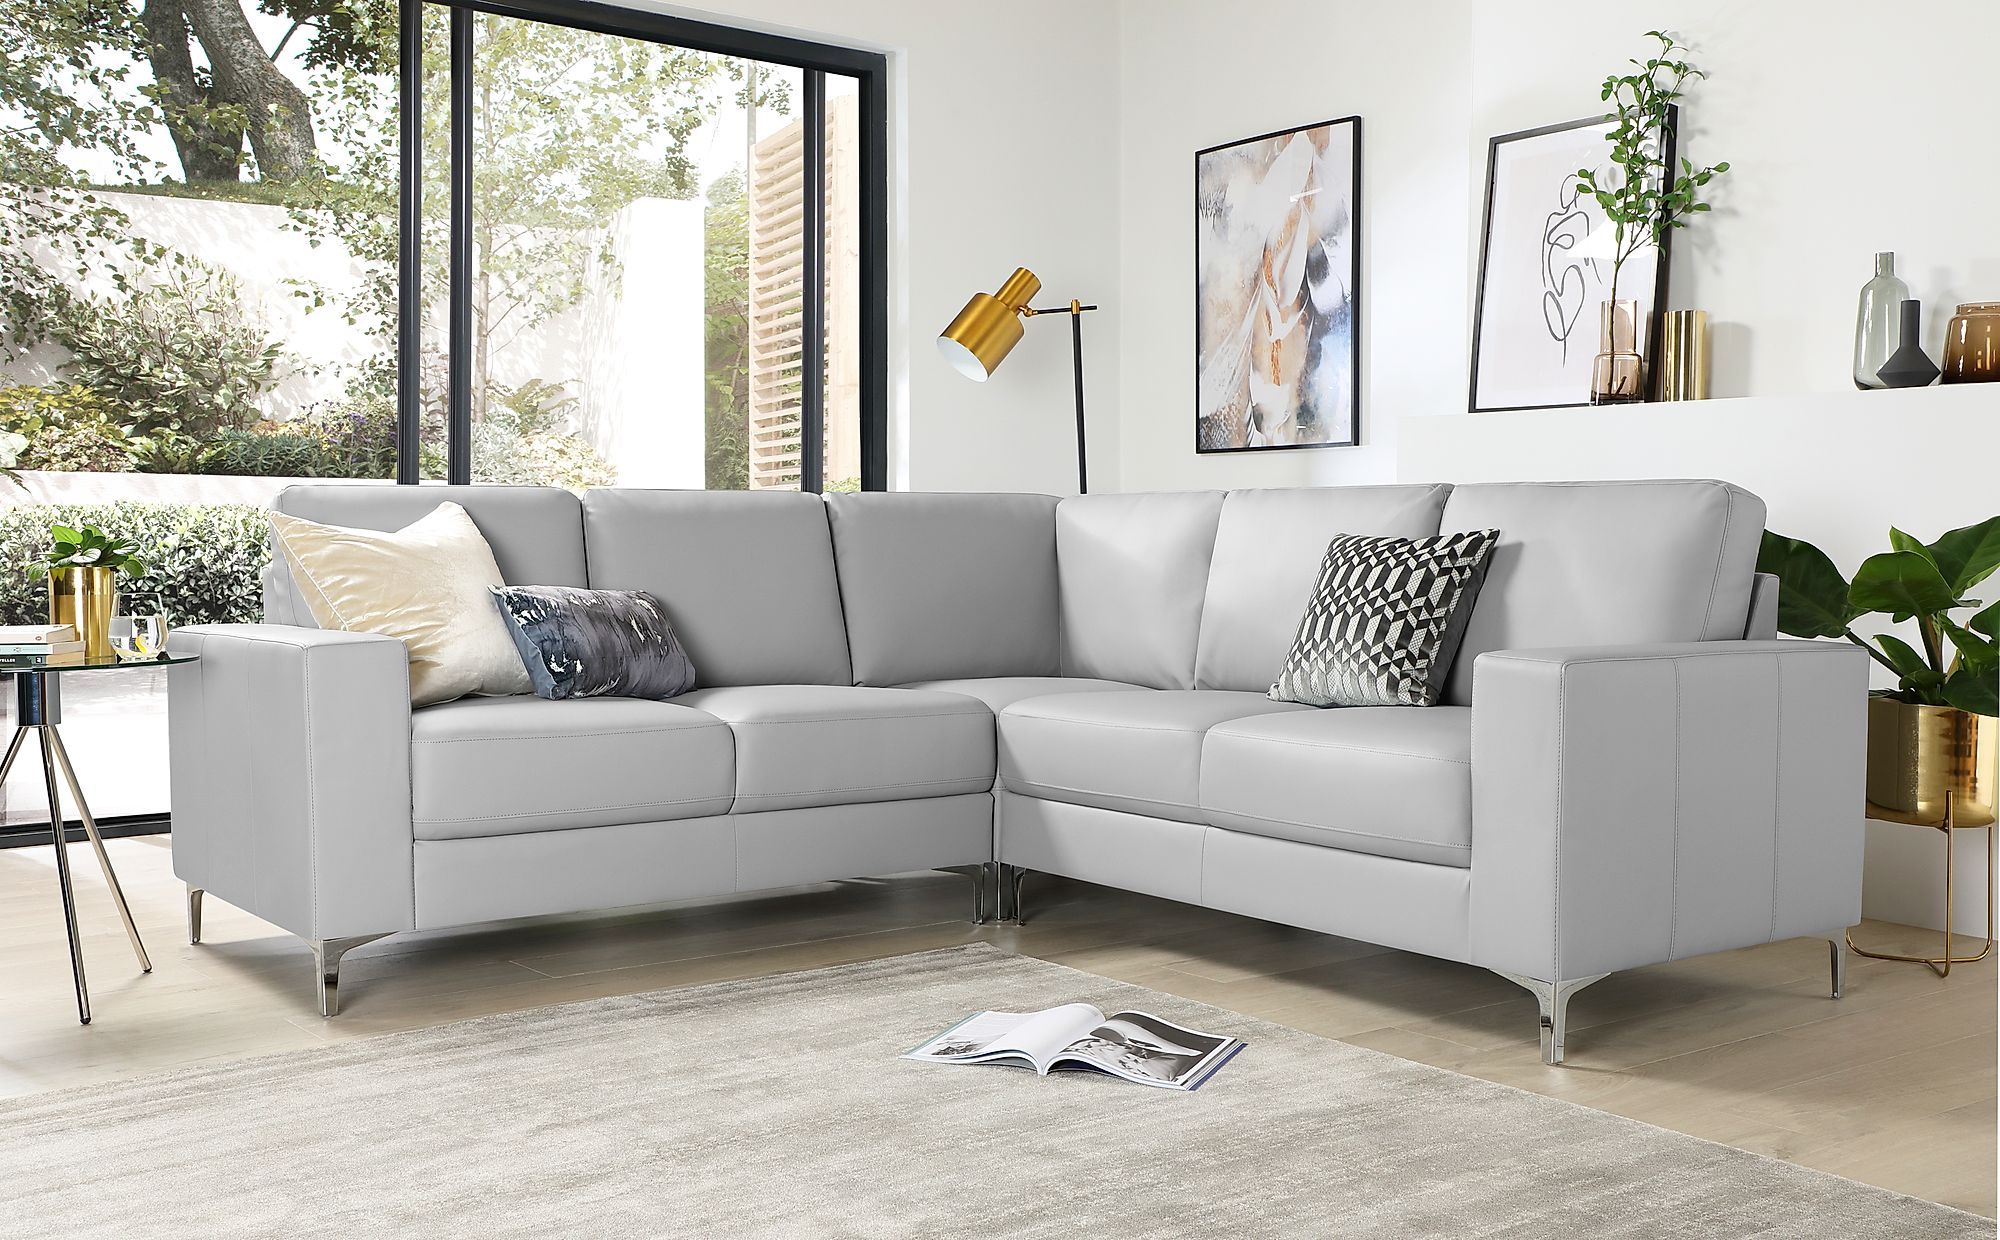 Baltimore Light Grey Leather Corner Sofa | Furniture Choice Within Sofas In Light Gray (View 15 of 22)